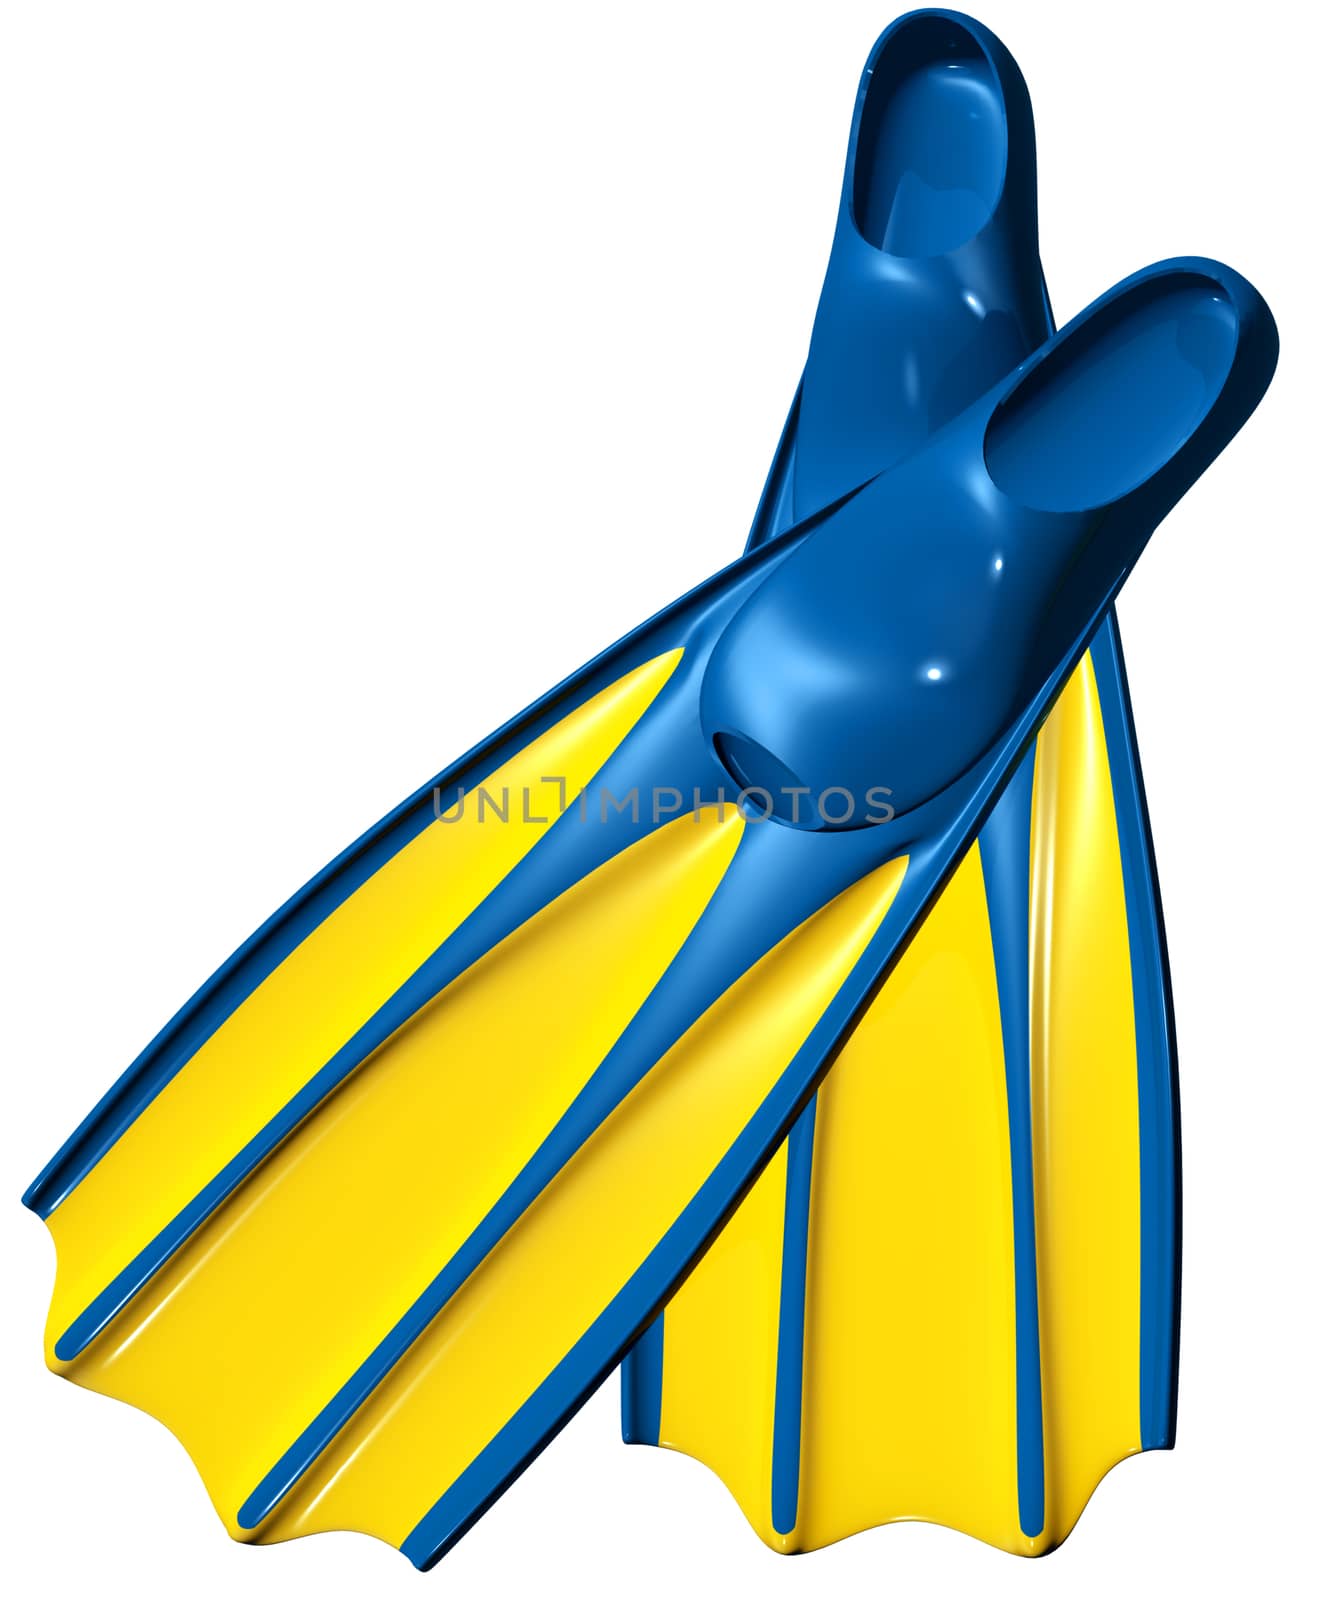 swim fins with blue rubber and yellow plastic by merzavka